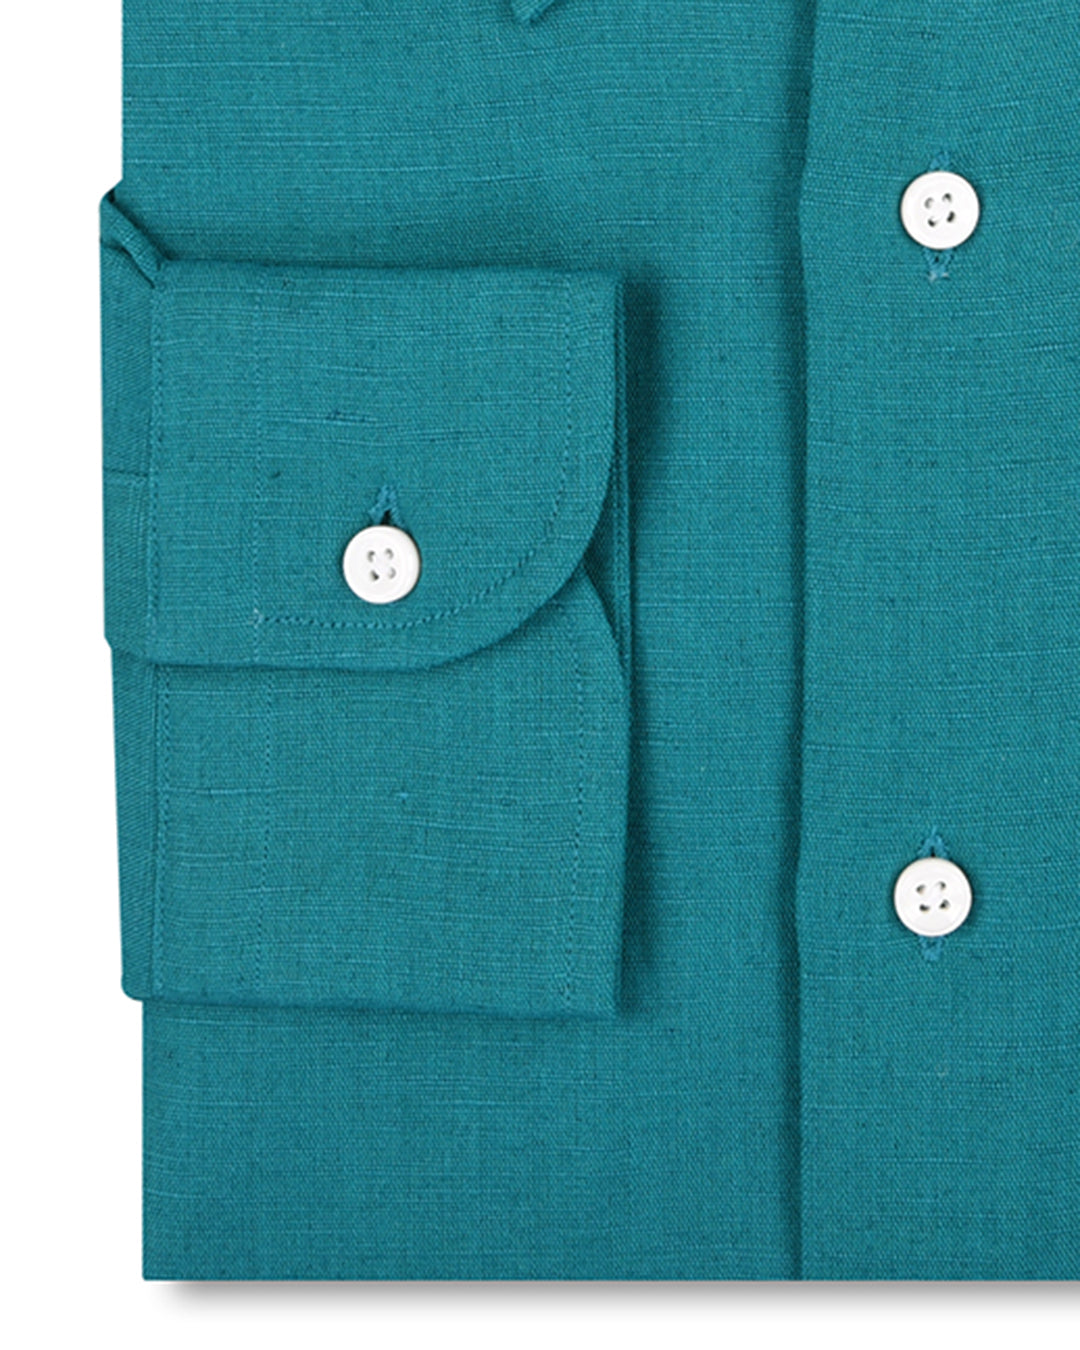 Cuff of custom linen shirt for men in persian green by Luxire Clothing